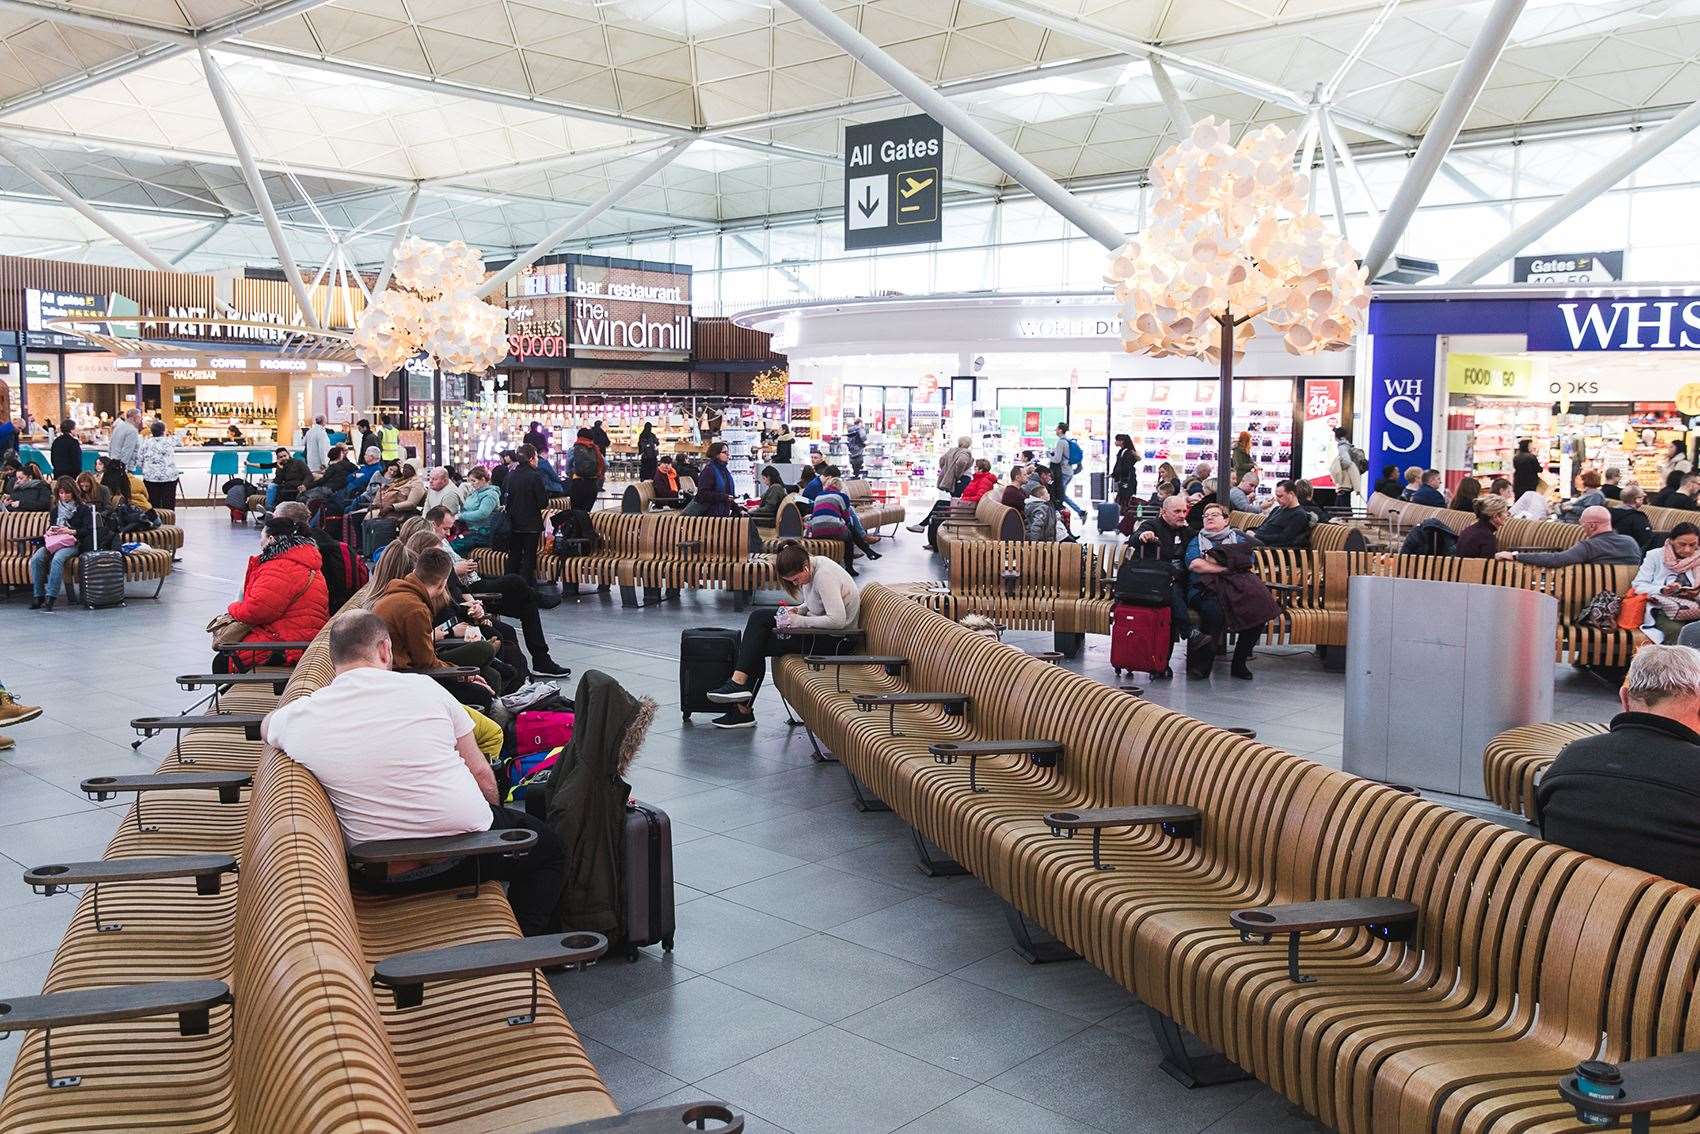 "Across the summer, although volumes remained depressed compared to 2019 levels, Stansted was the second busiest airport in the UK – up from our usual fourth place"